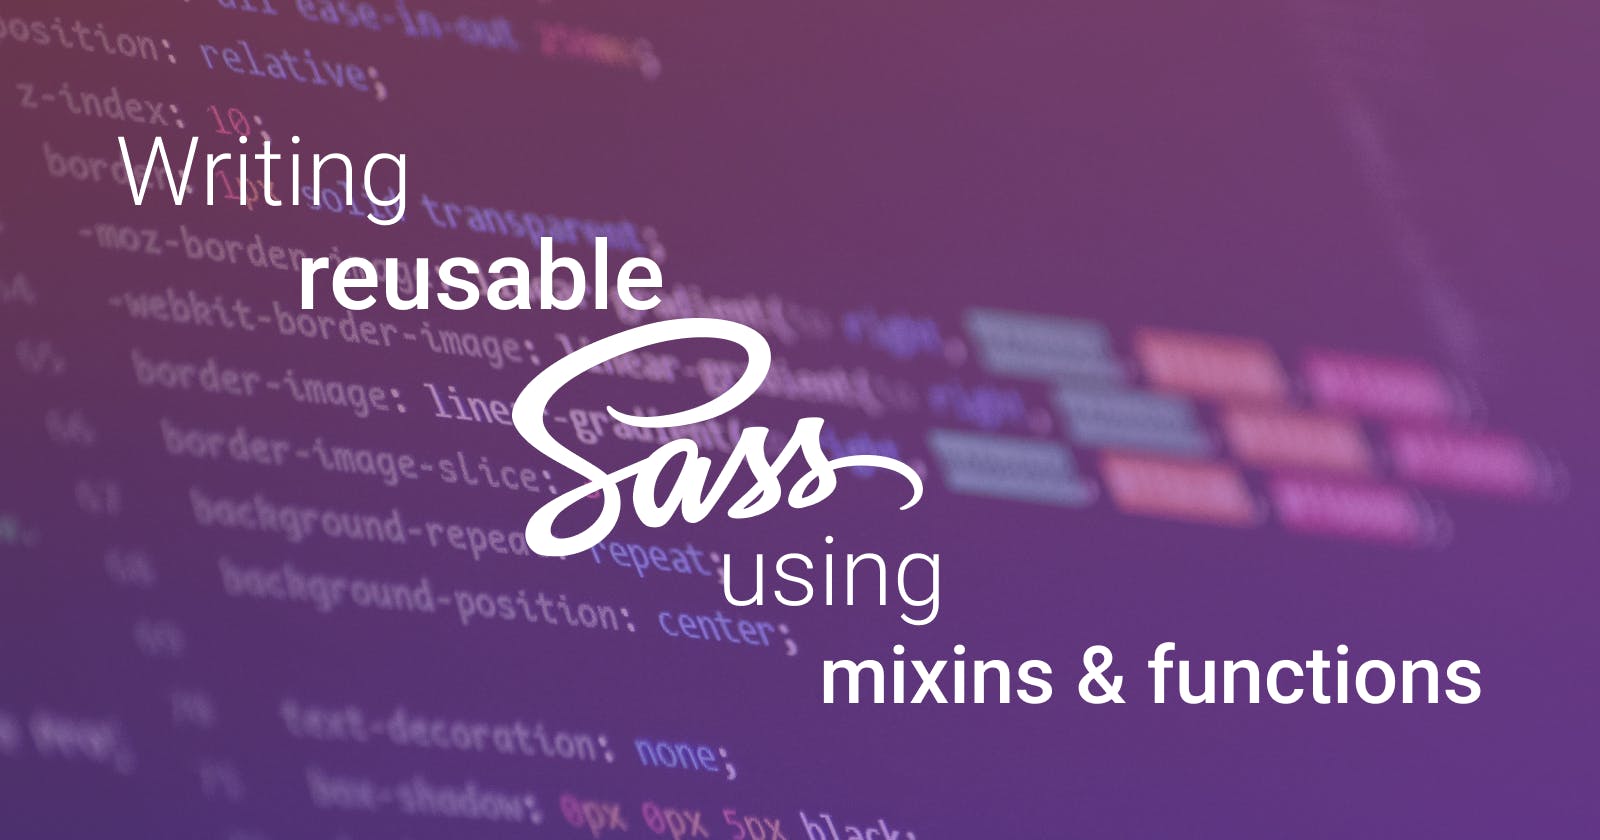 Writing reusable SCSS using mixins & functions